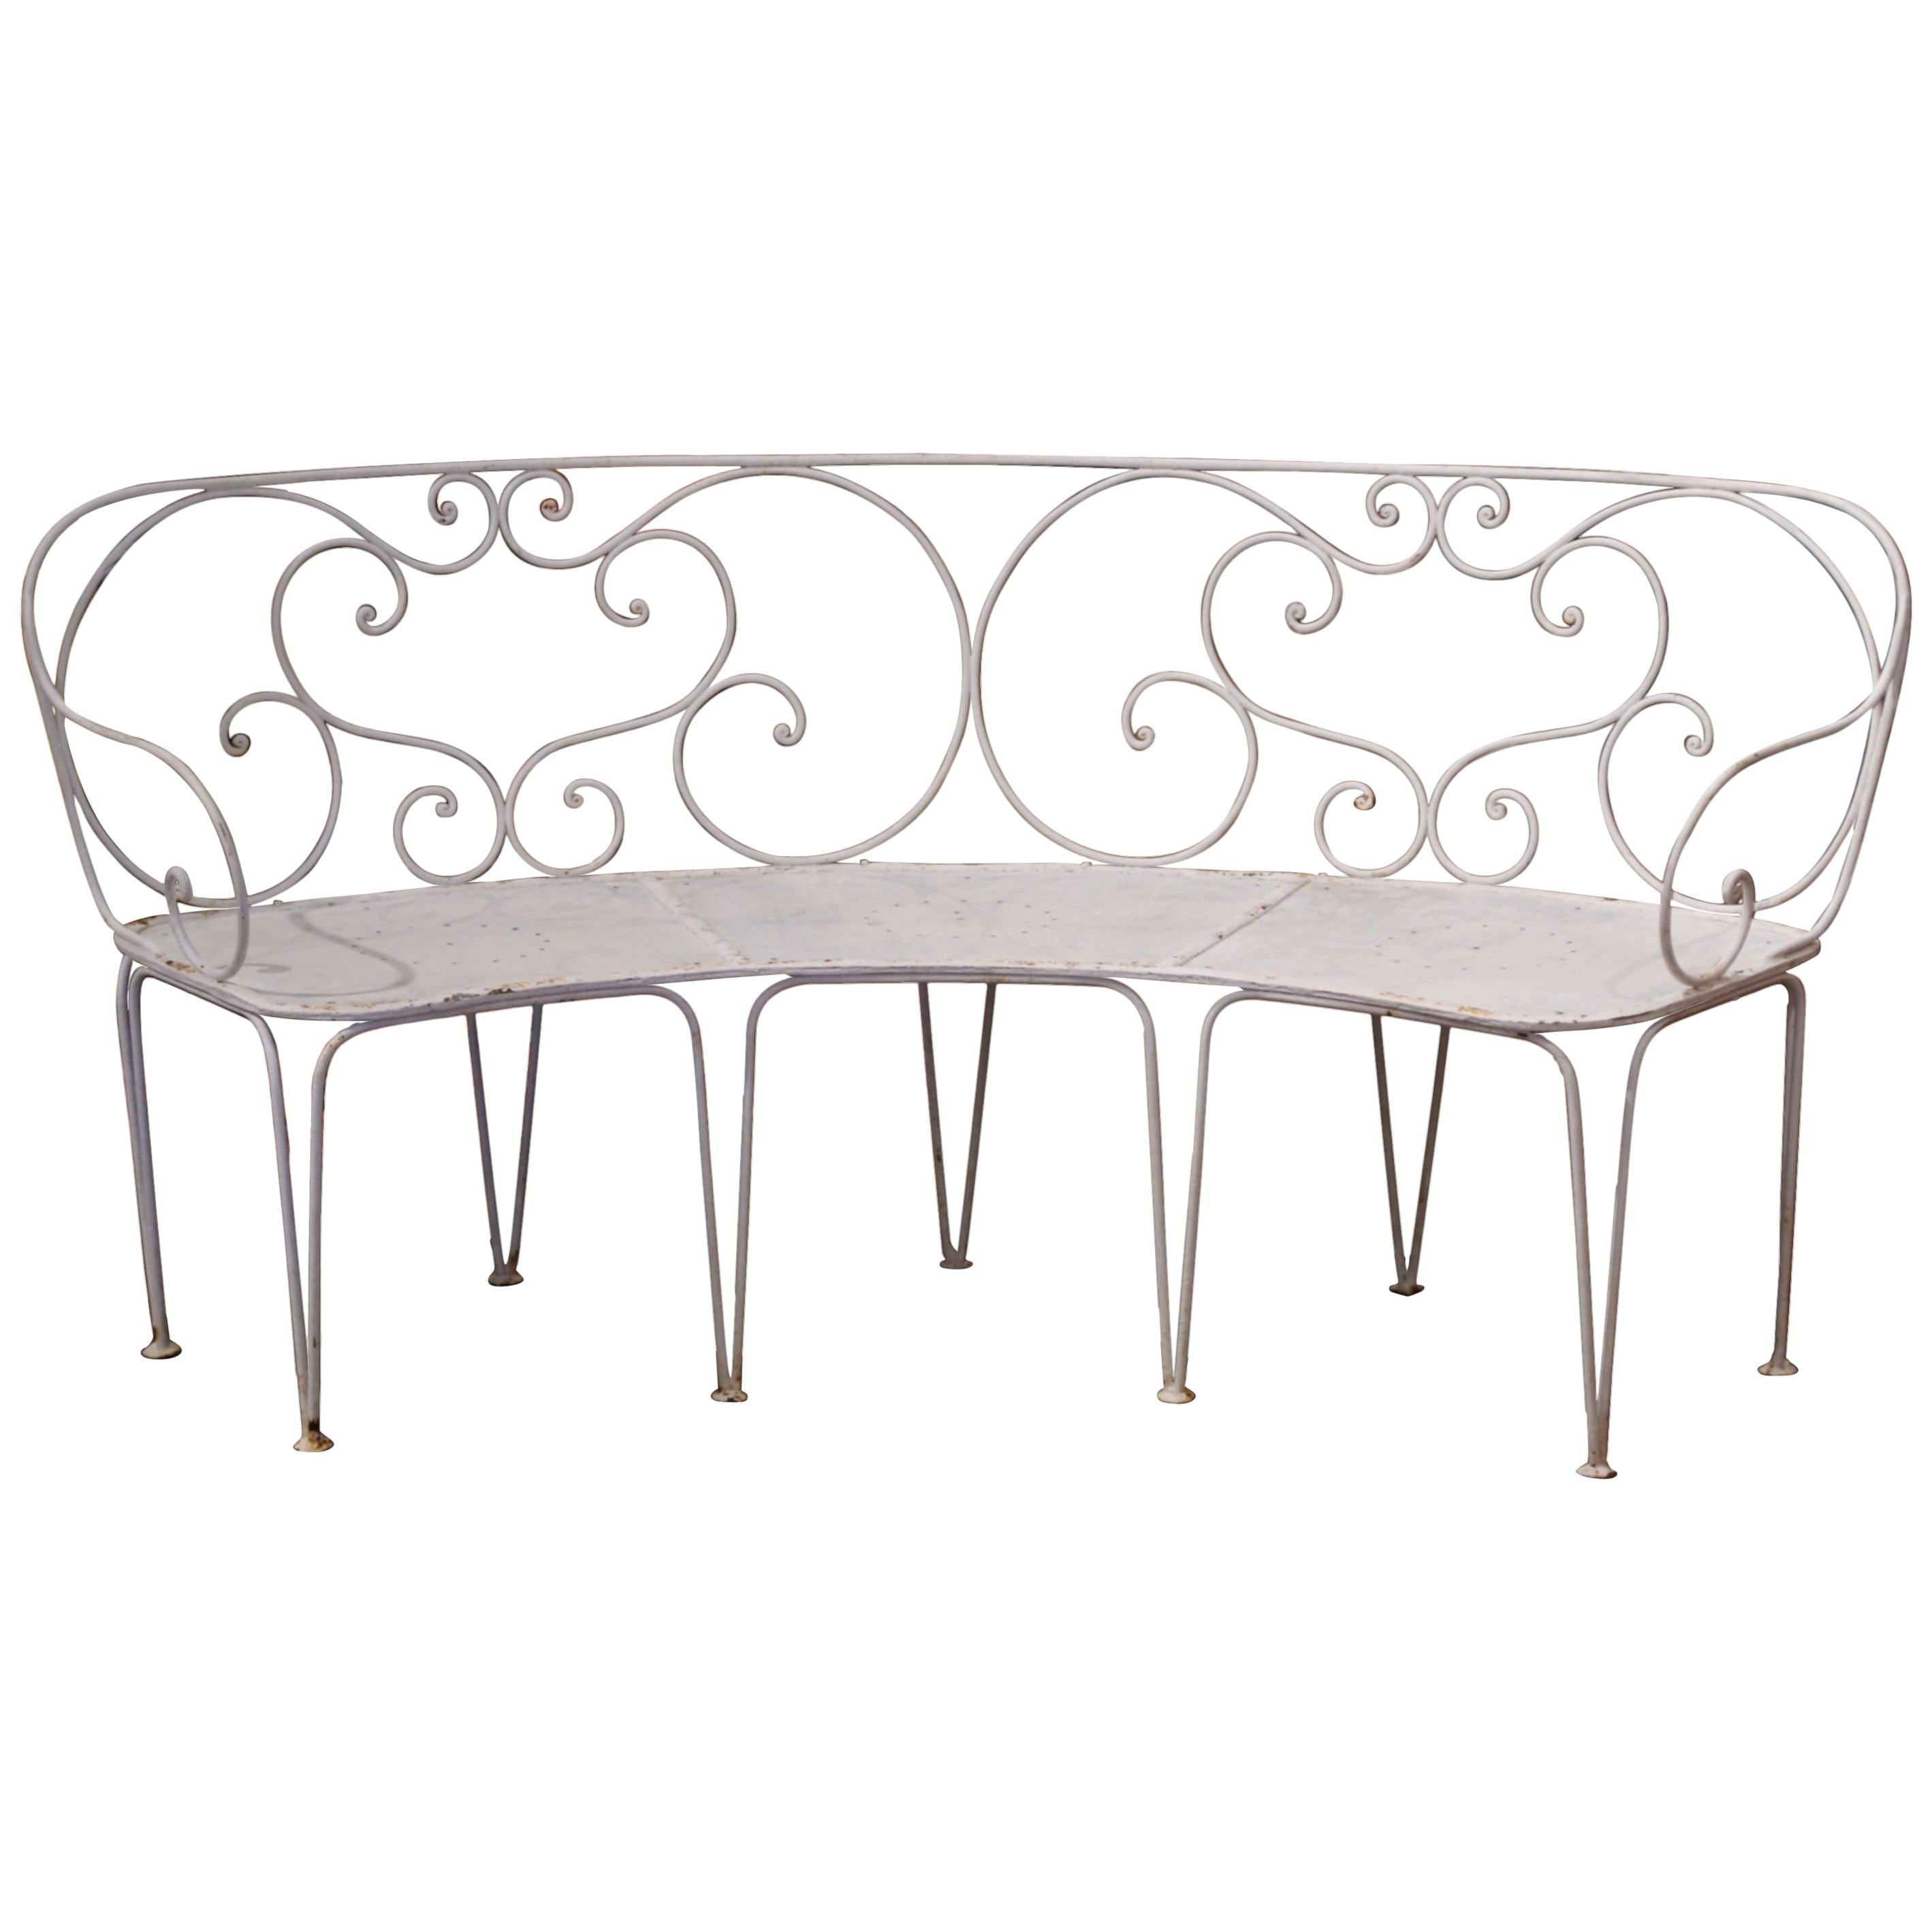 19th Century French Curved Painted Iron Three-Seat Garden Bench from Normandy